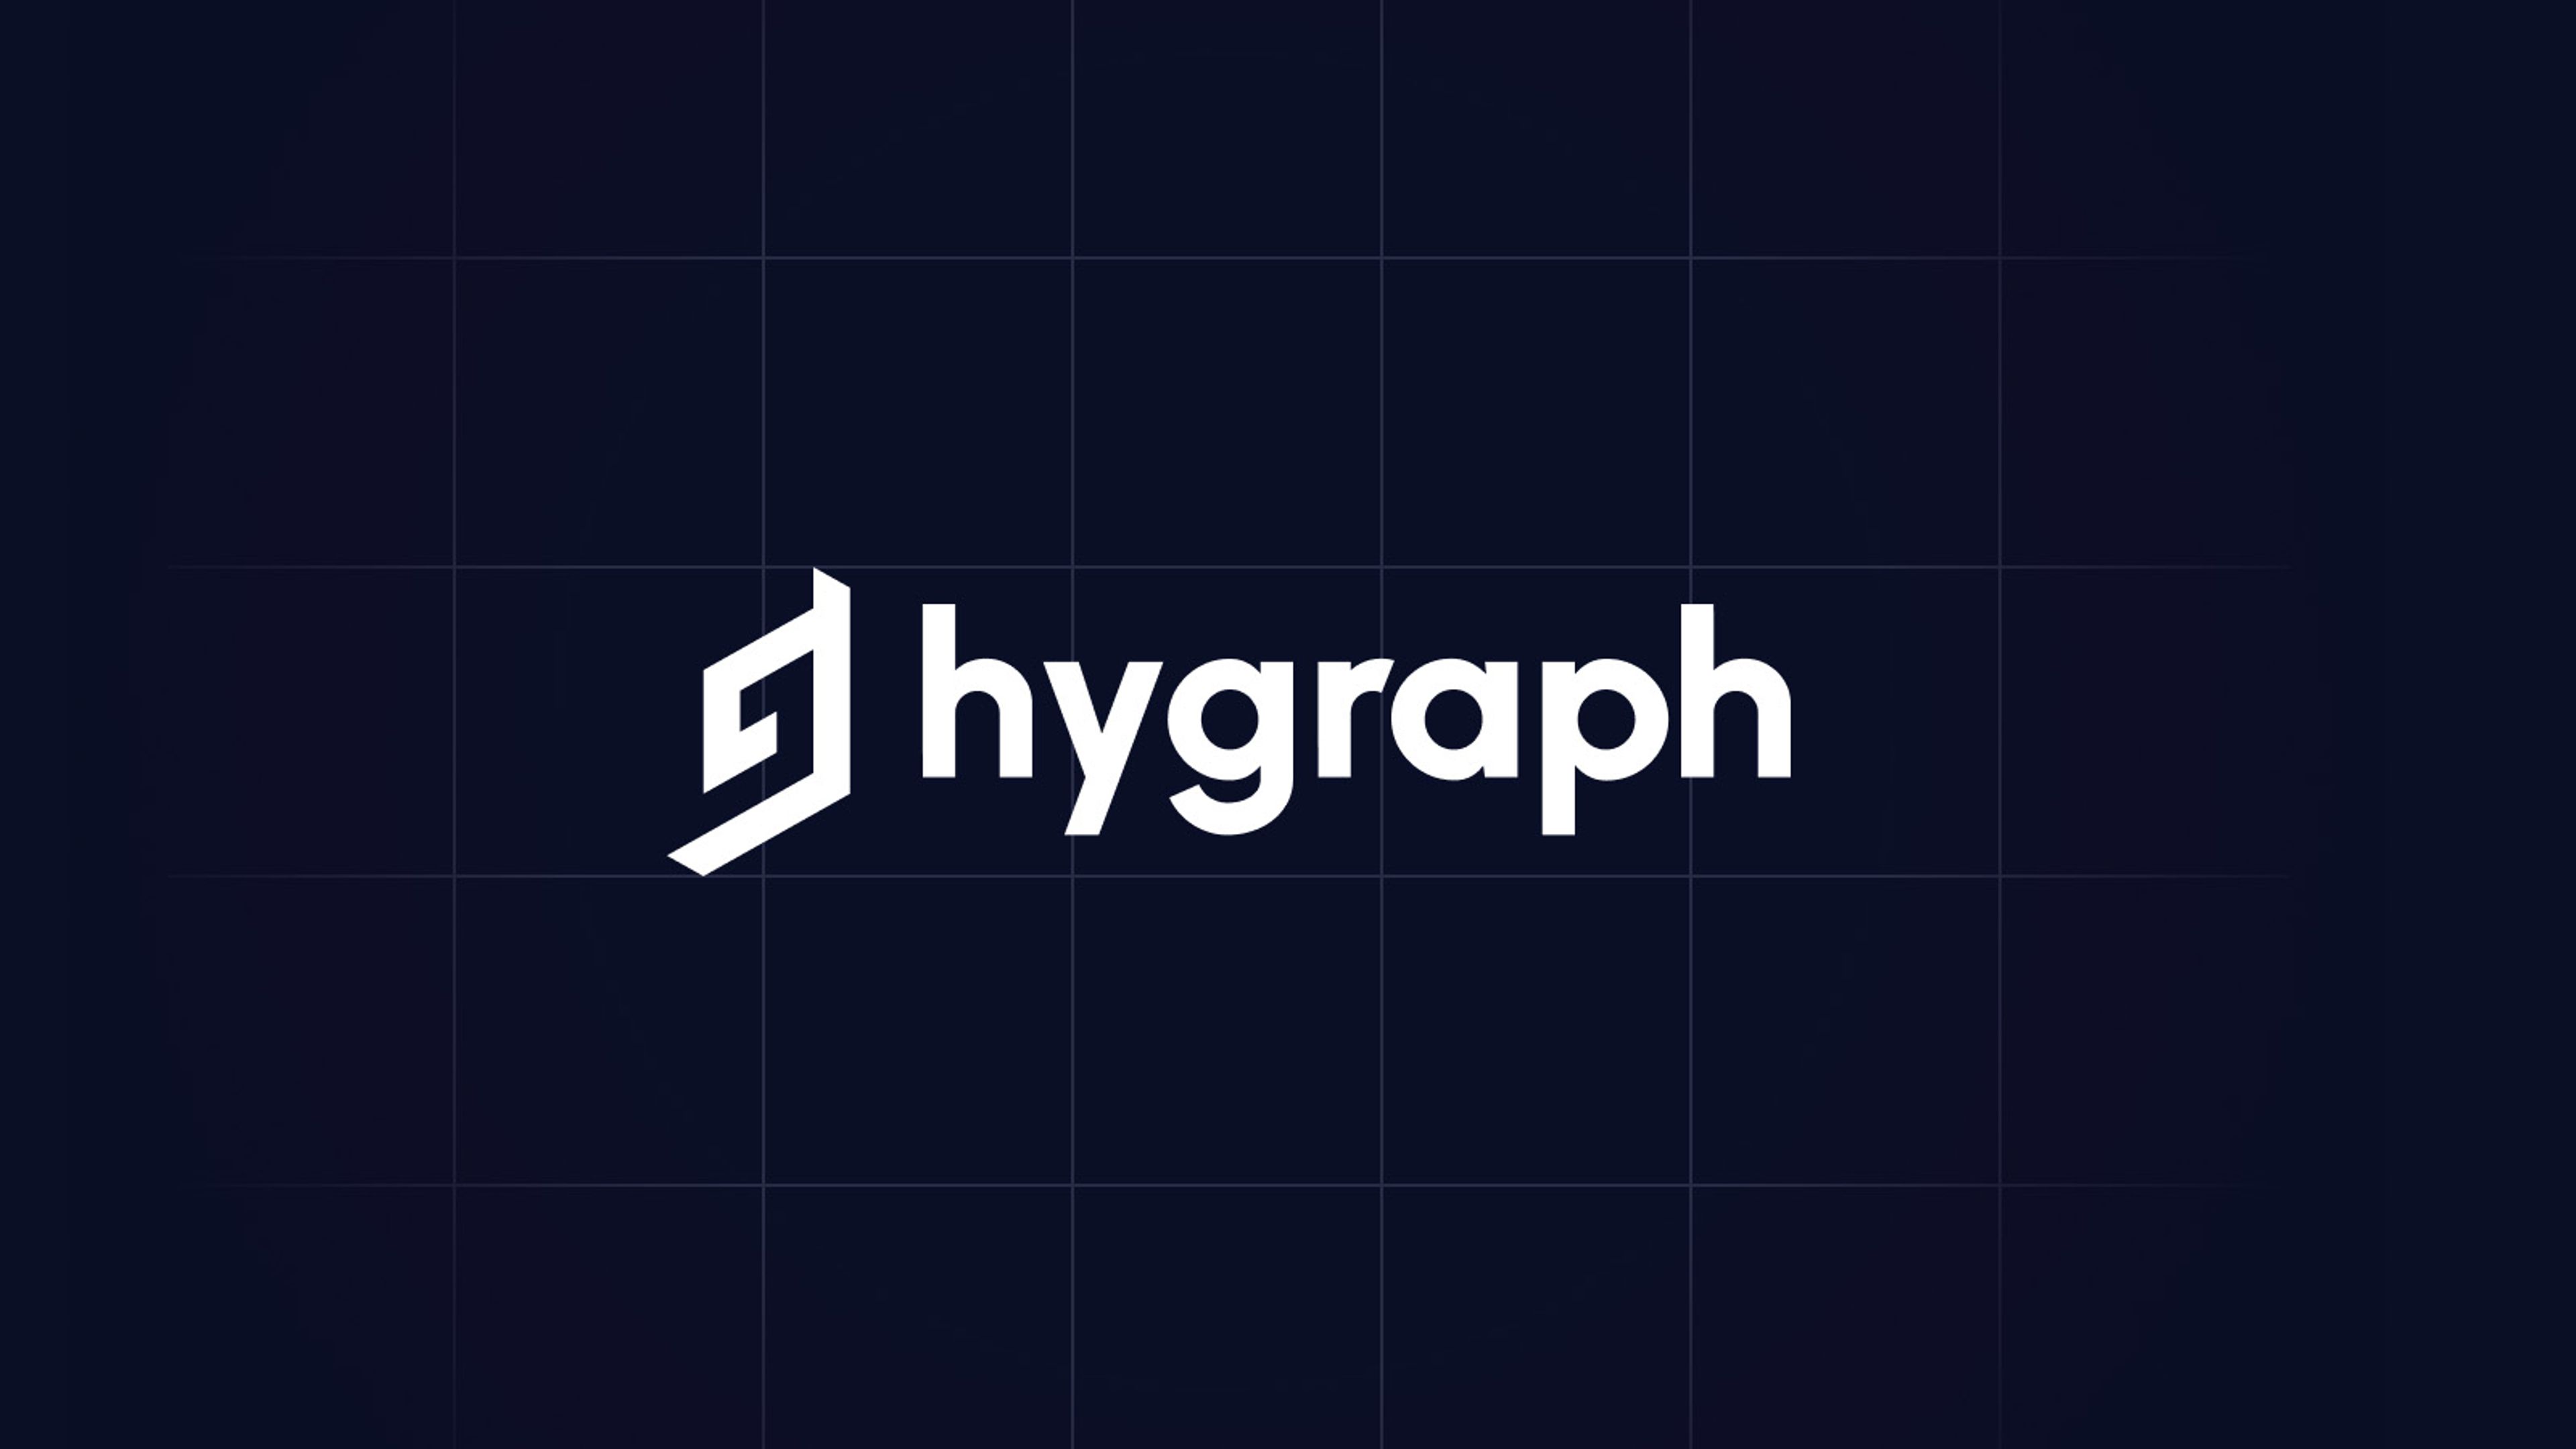 Image of new Hygraph logo against a dark background with a graph pattern